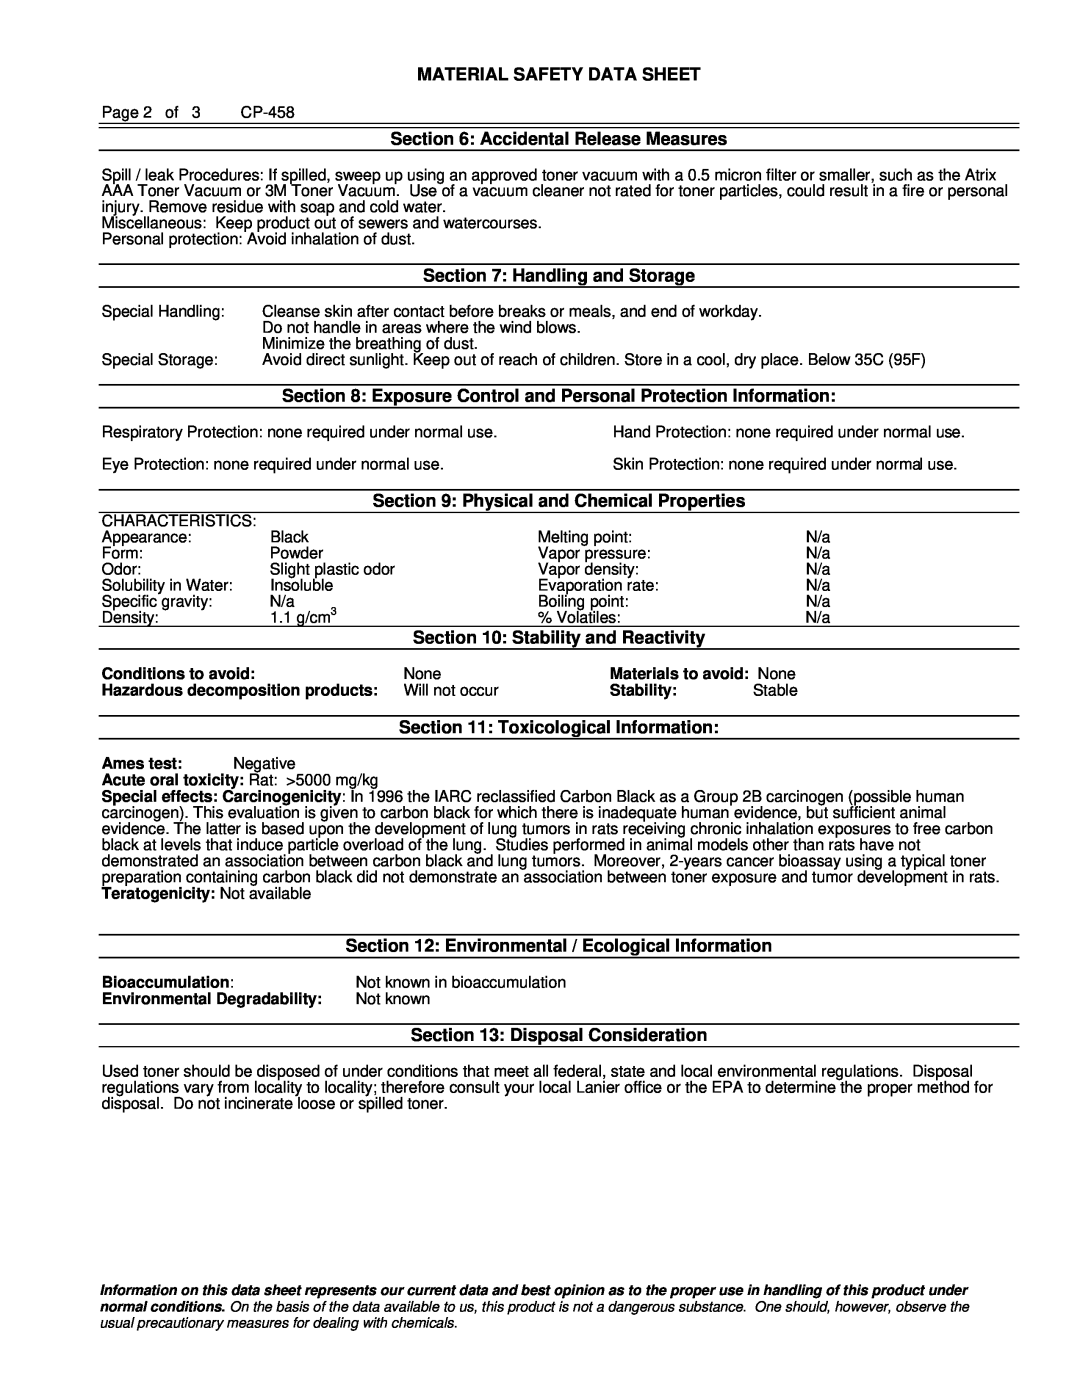 Lanier CP-458 Material Safety Data Sheet, Accidental Release Measures, Handling and Storage, Stability and Reactivity 